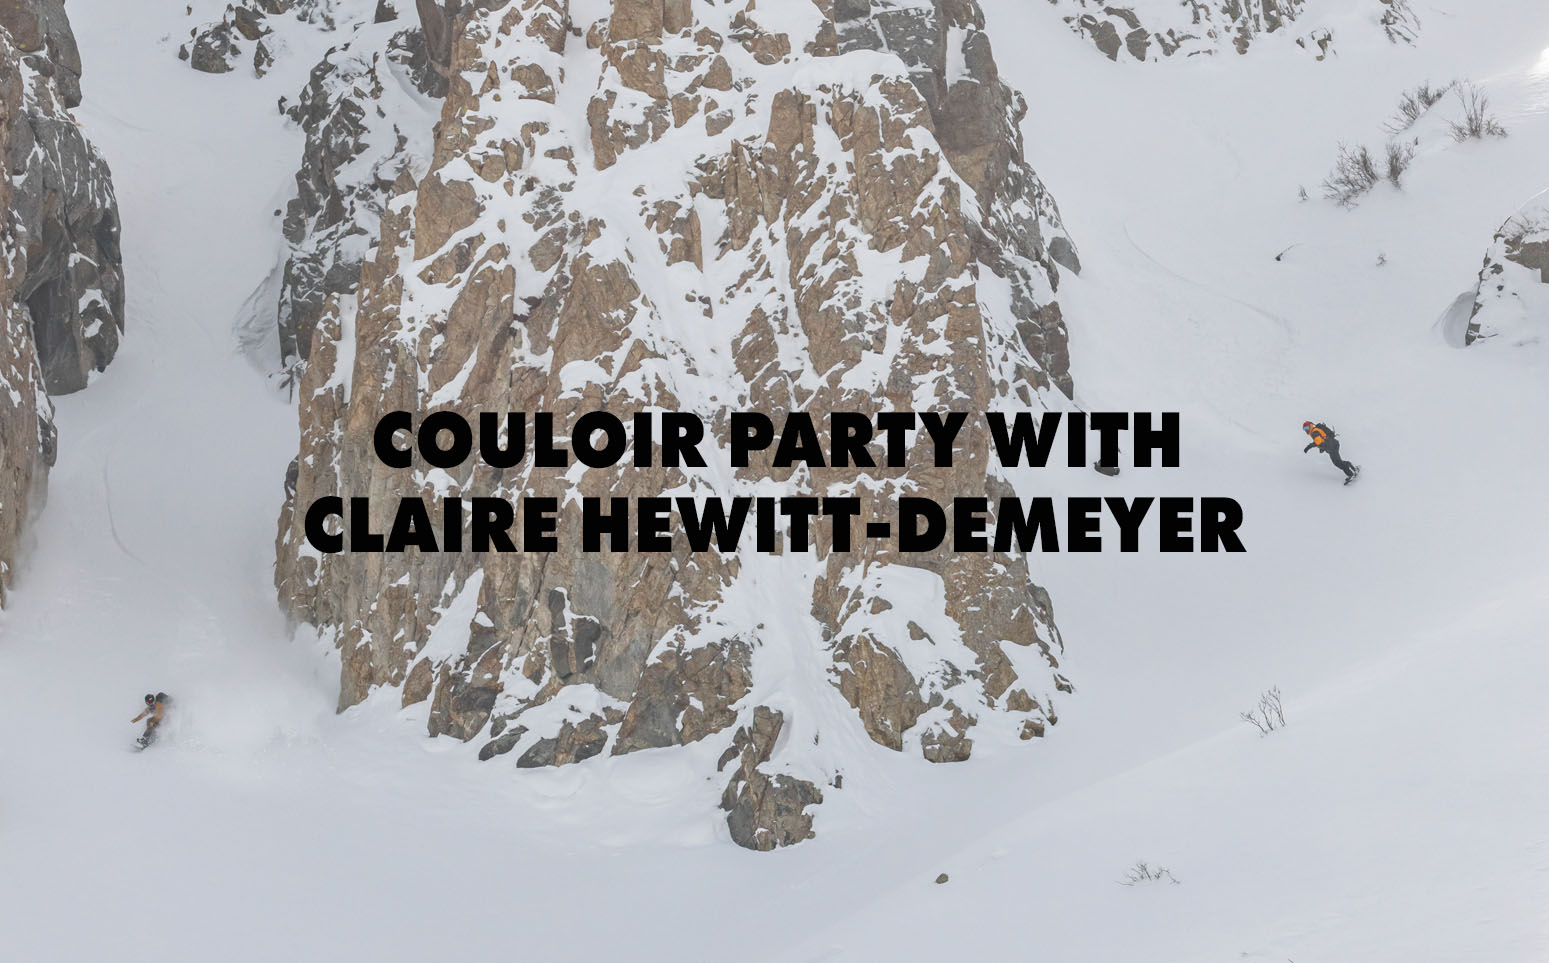 Couloir Party With Claire Hewitt-Demeyer